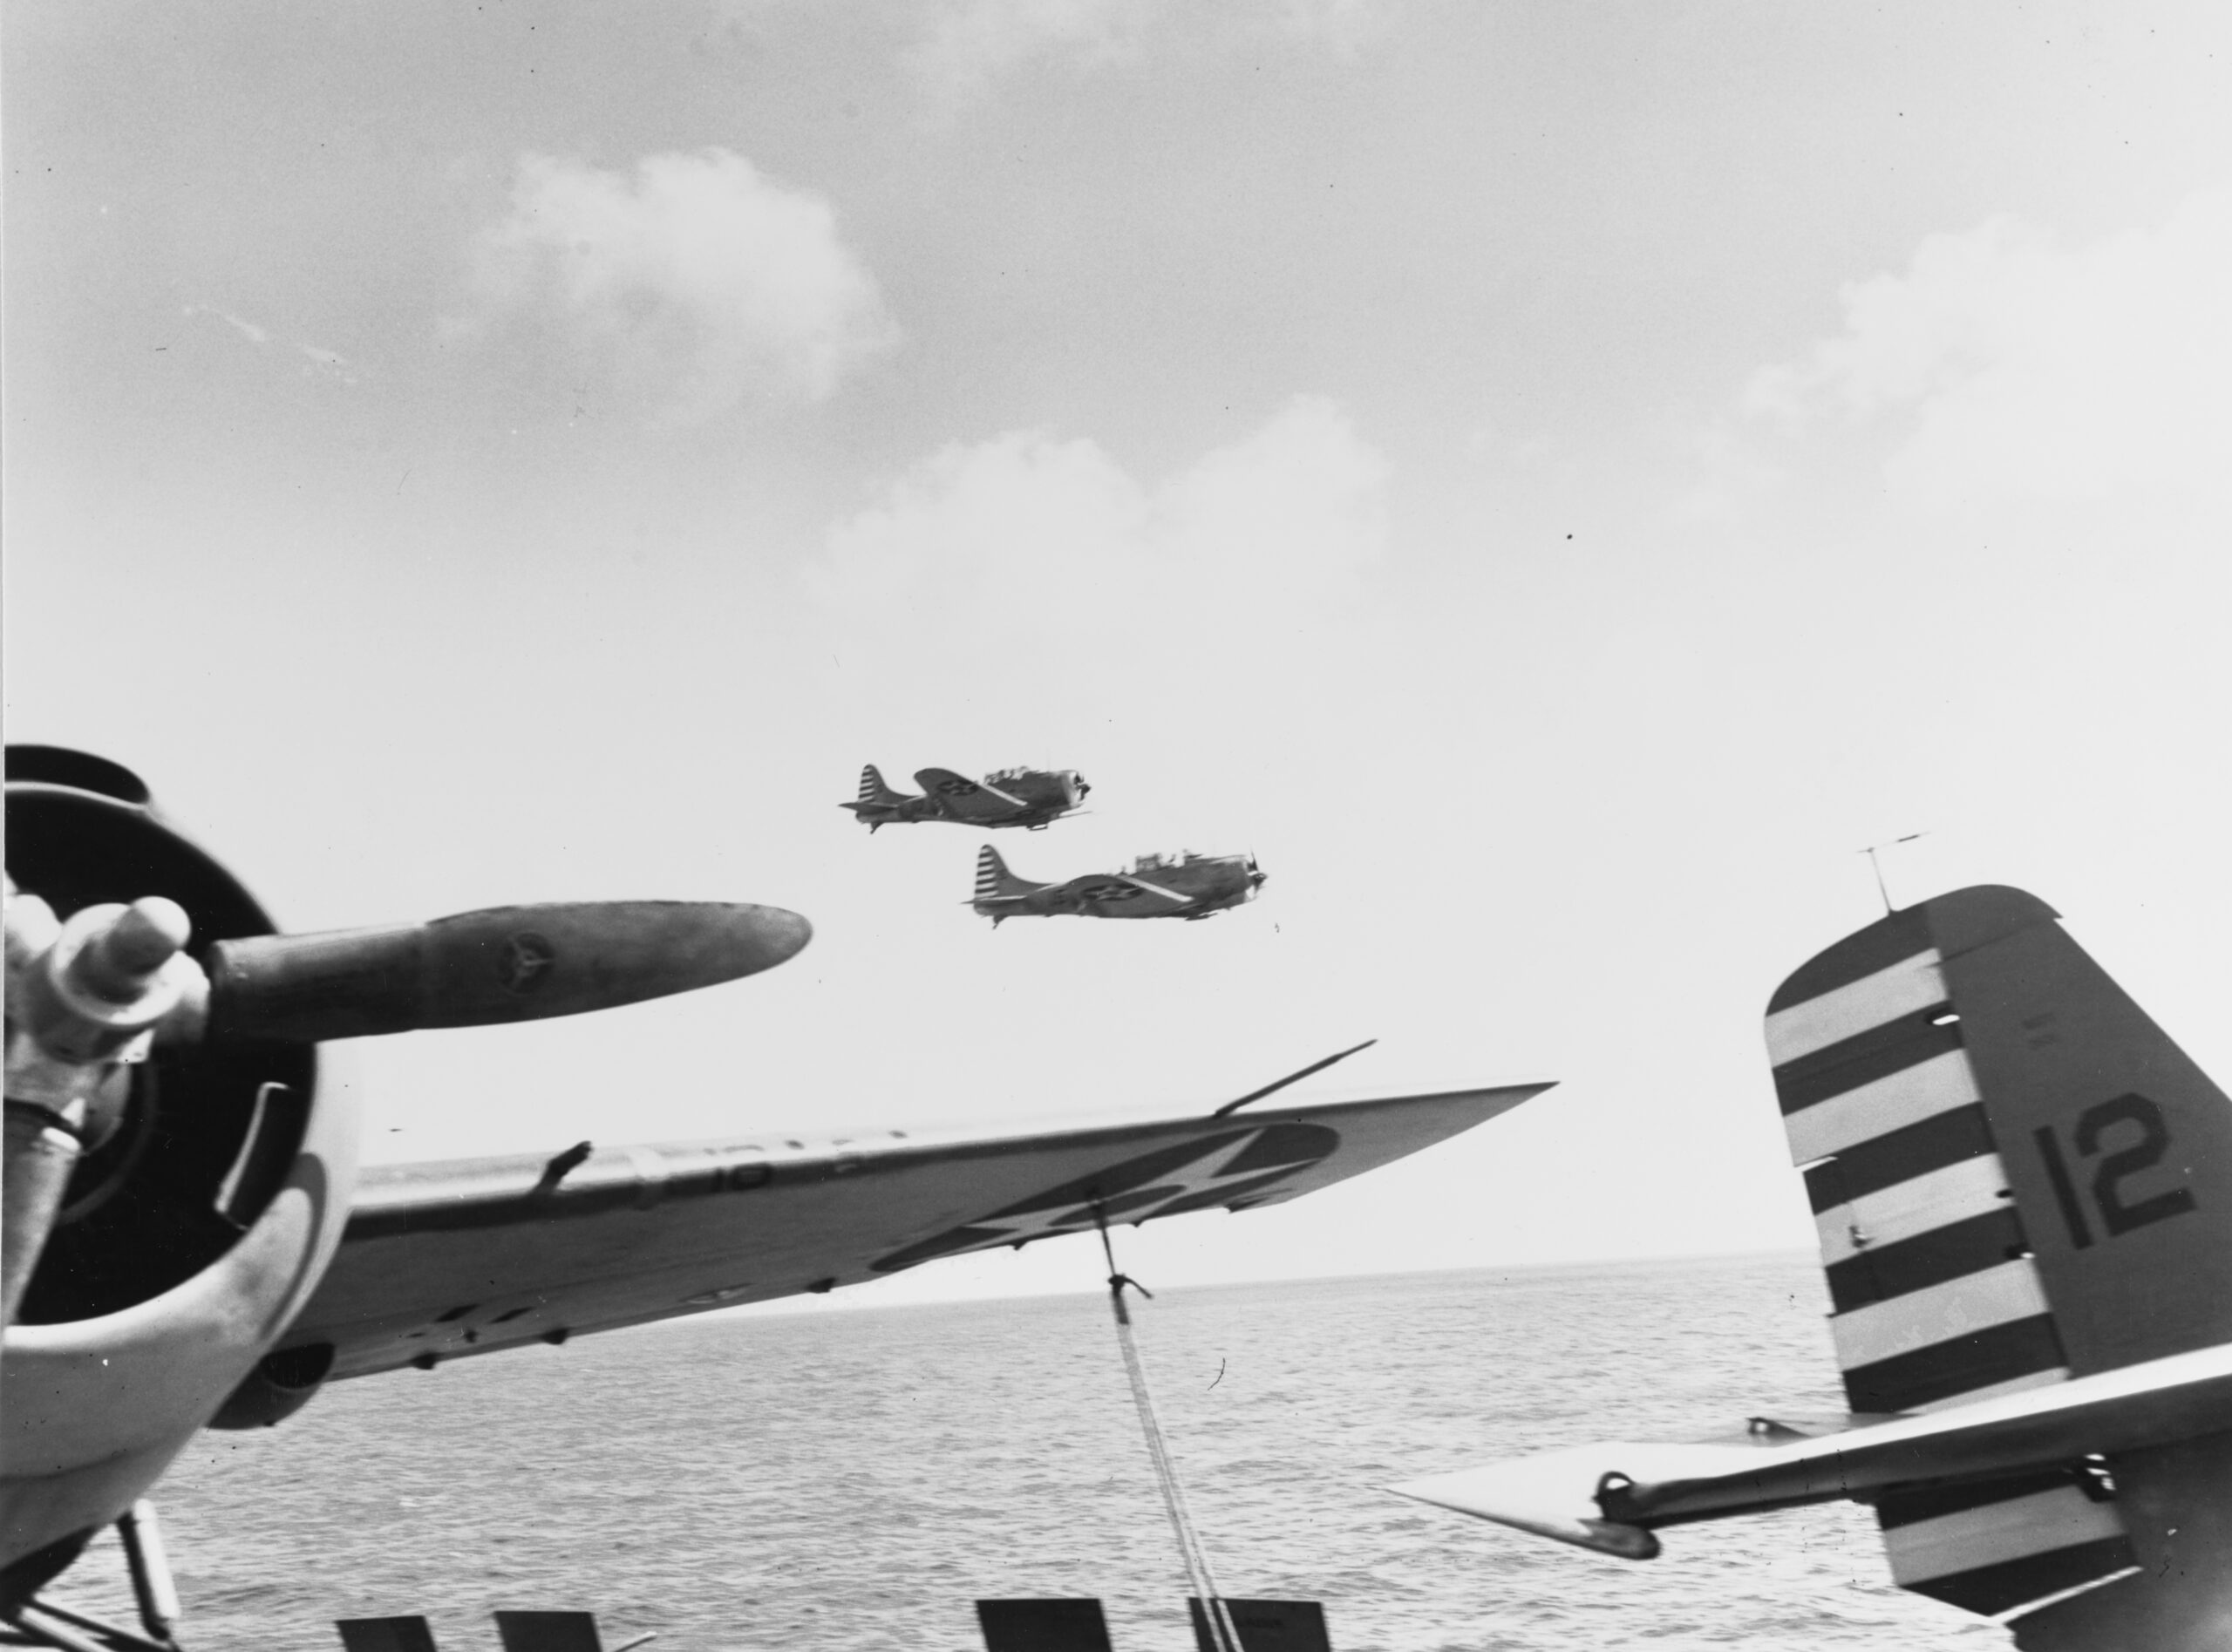 A brace of SBD-3s from VS-5 flying past USS Yorktown (CV 5) during April, 1942. (U.S. Navy photo)